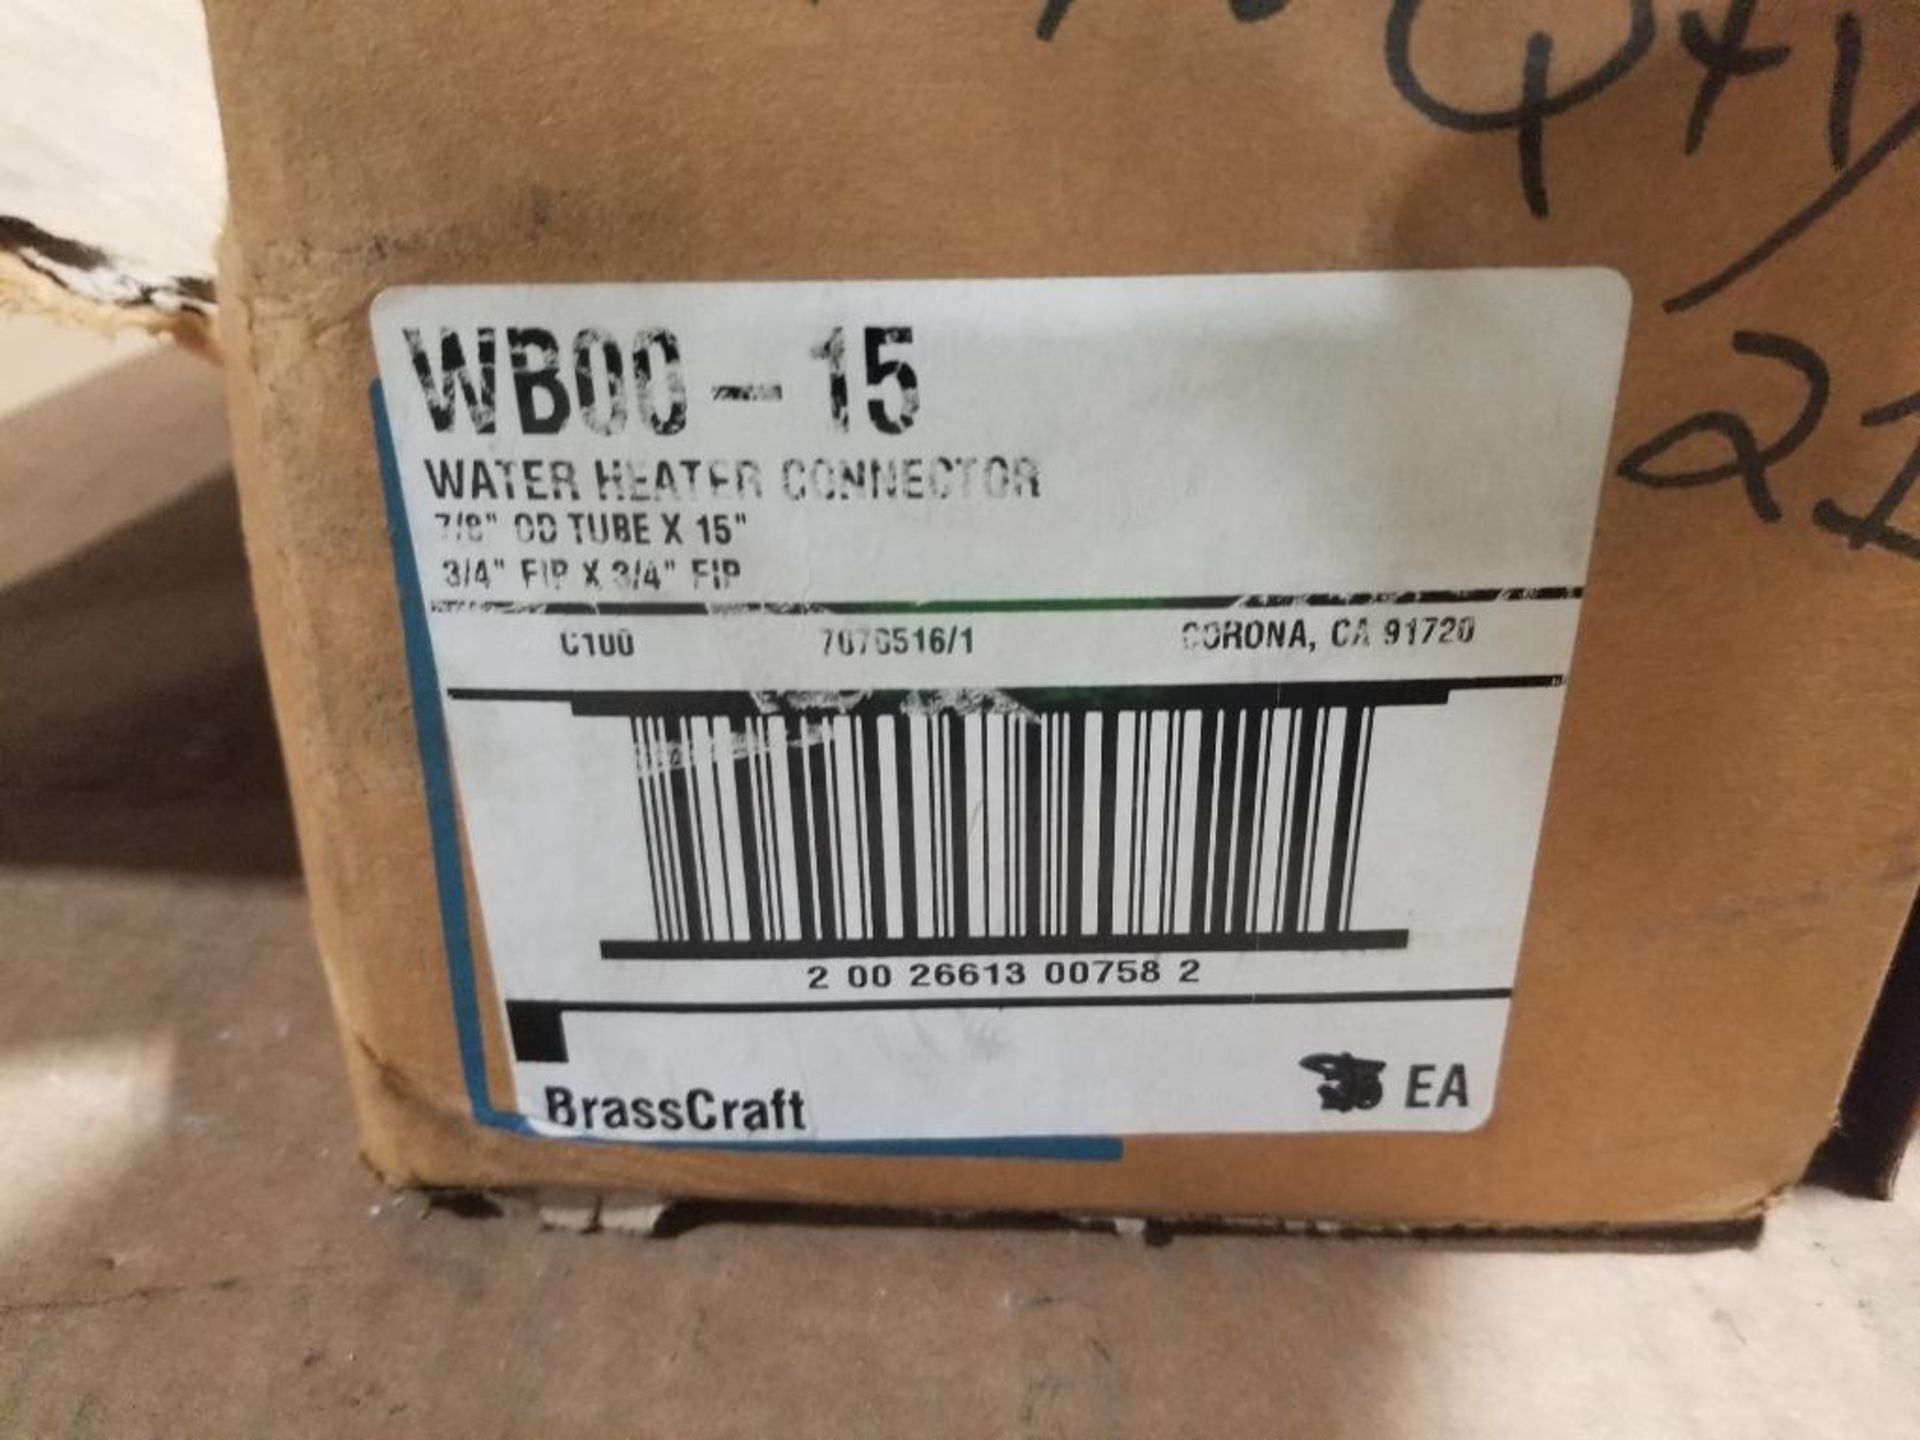 Qty 47 - Brass Craft copper water heater supply lines. Part number WB00-15. - Image 3 of 5